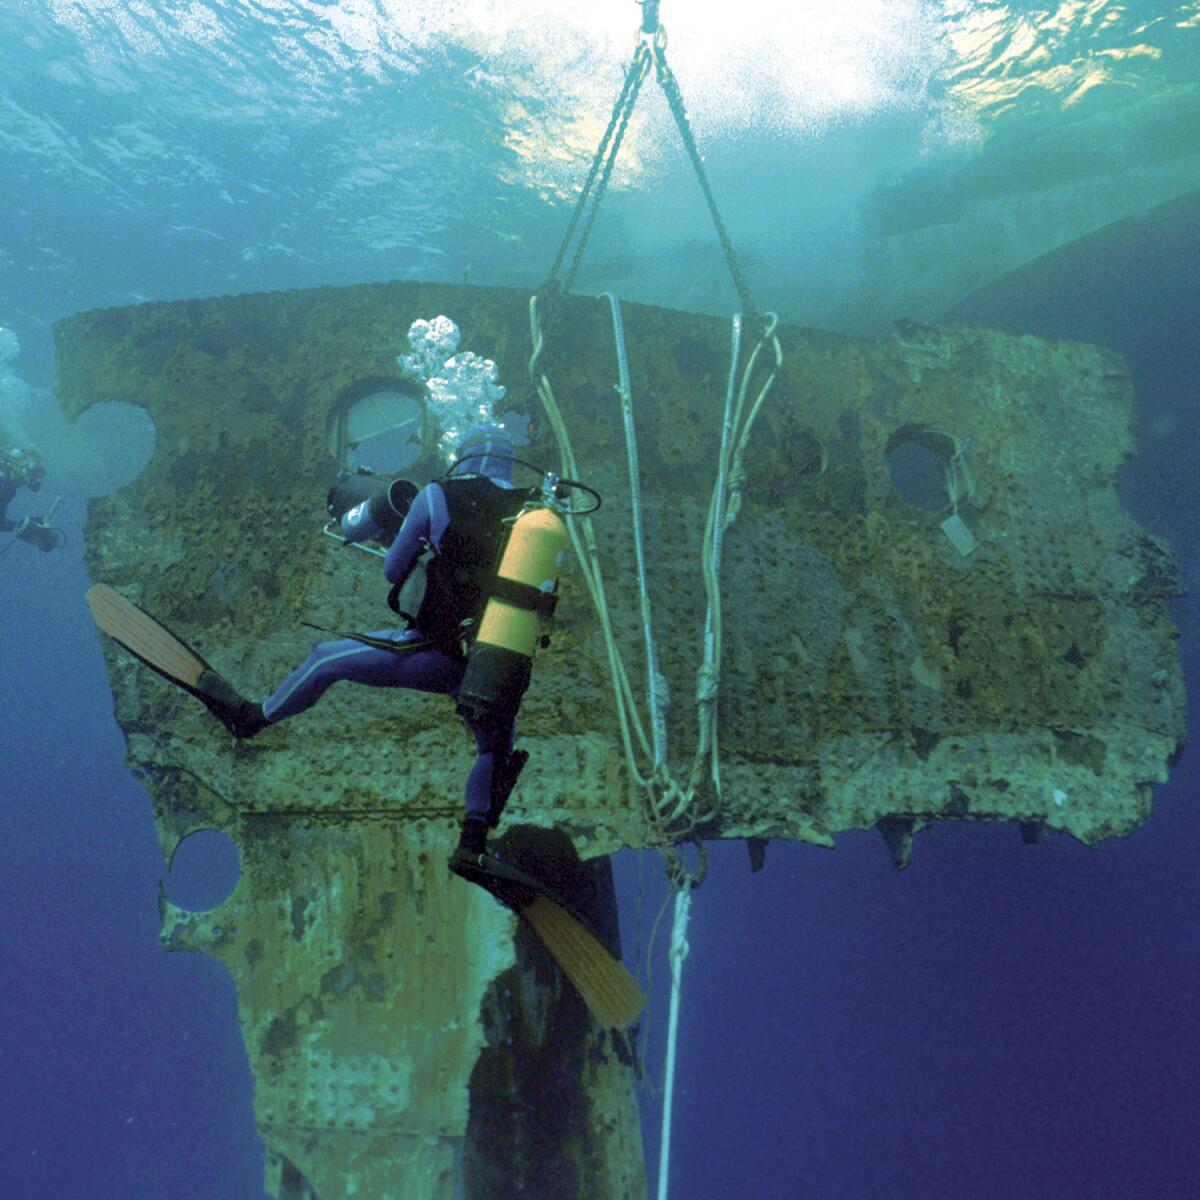 An underwater scene of a diver with an oxygen tank swimming vertically in front of a large metal piece of shipwreck